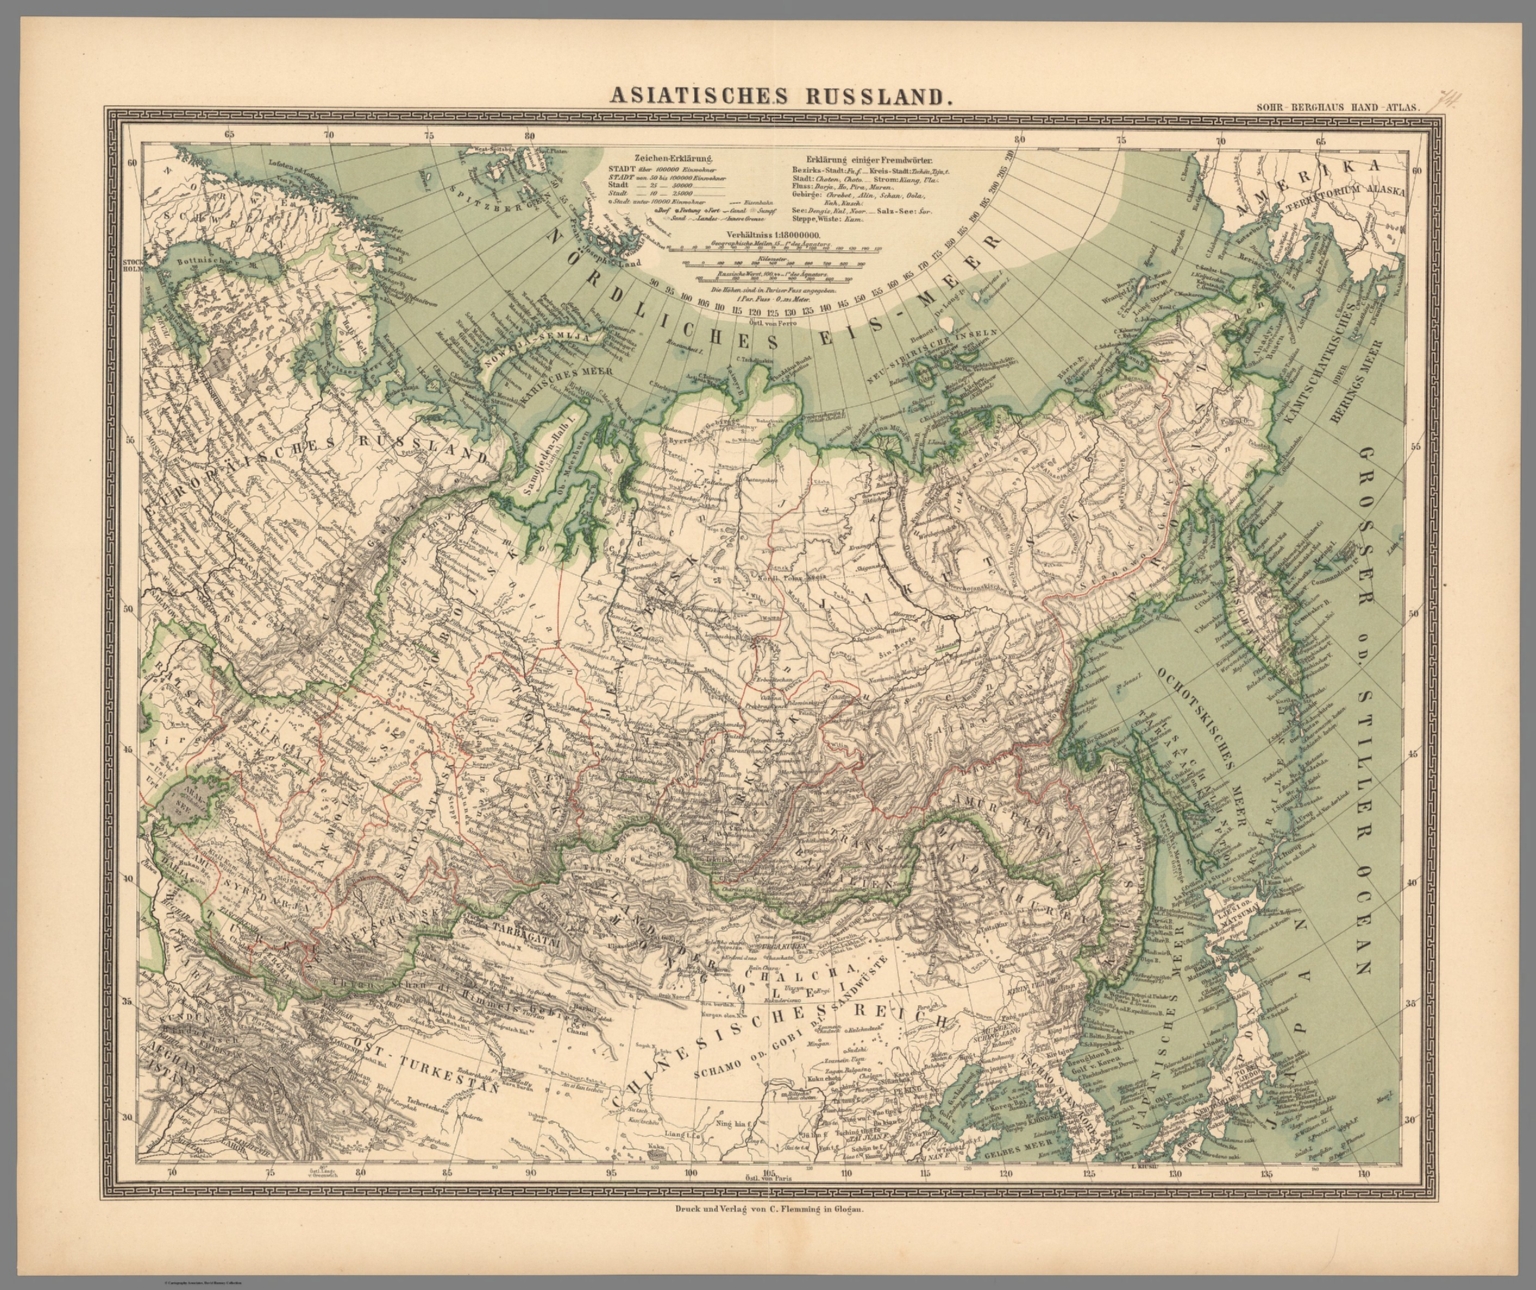 No.74. Asiatisches Russland - David Rumsey Historical Map Collection